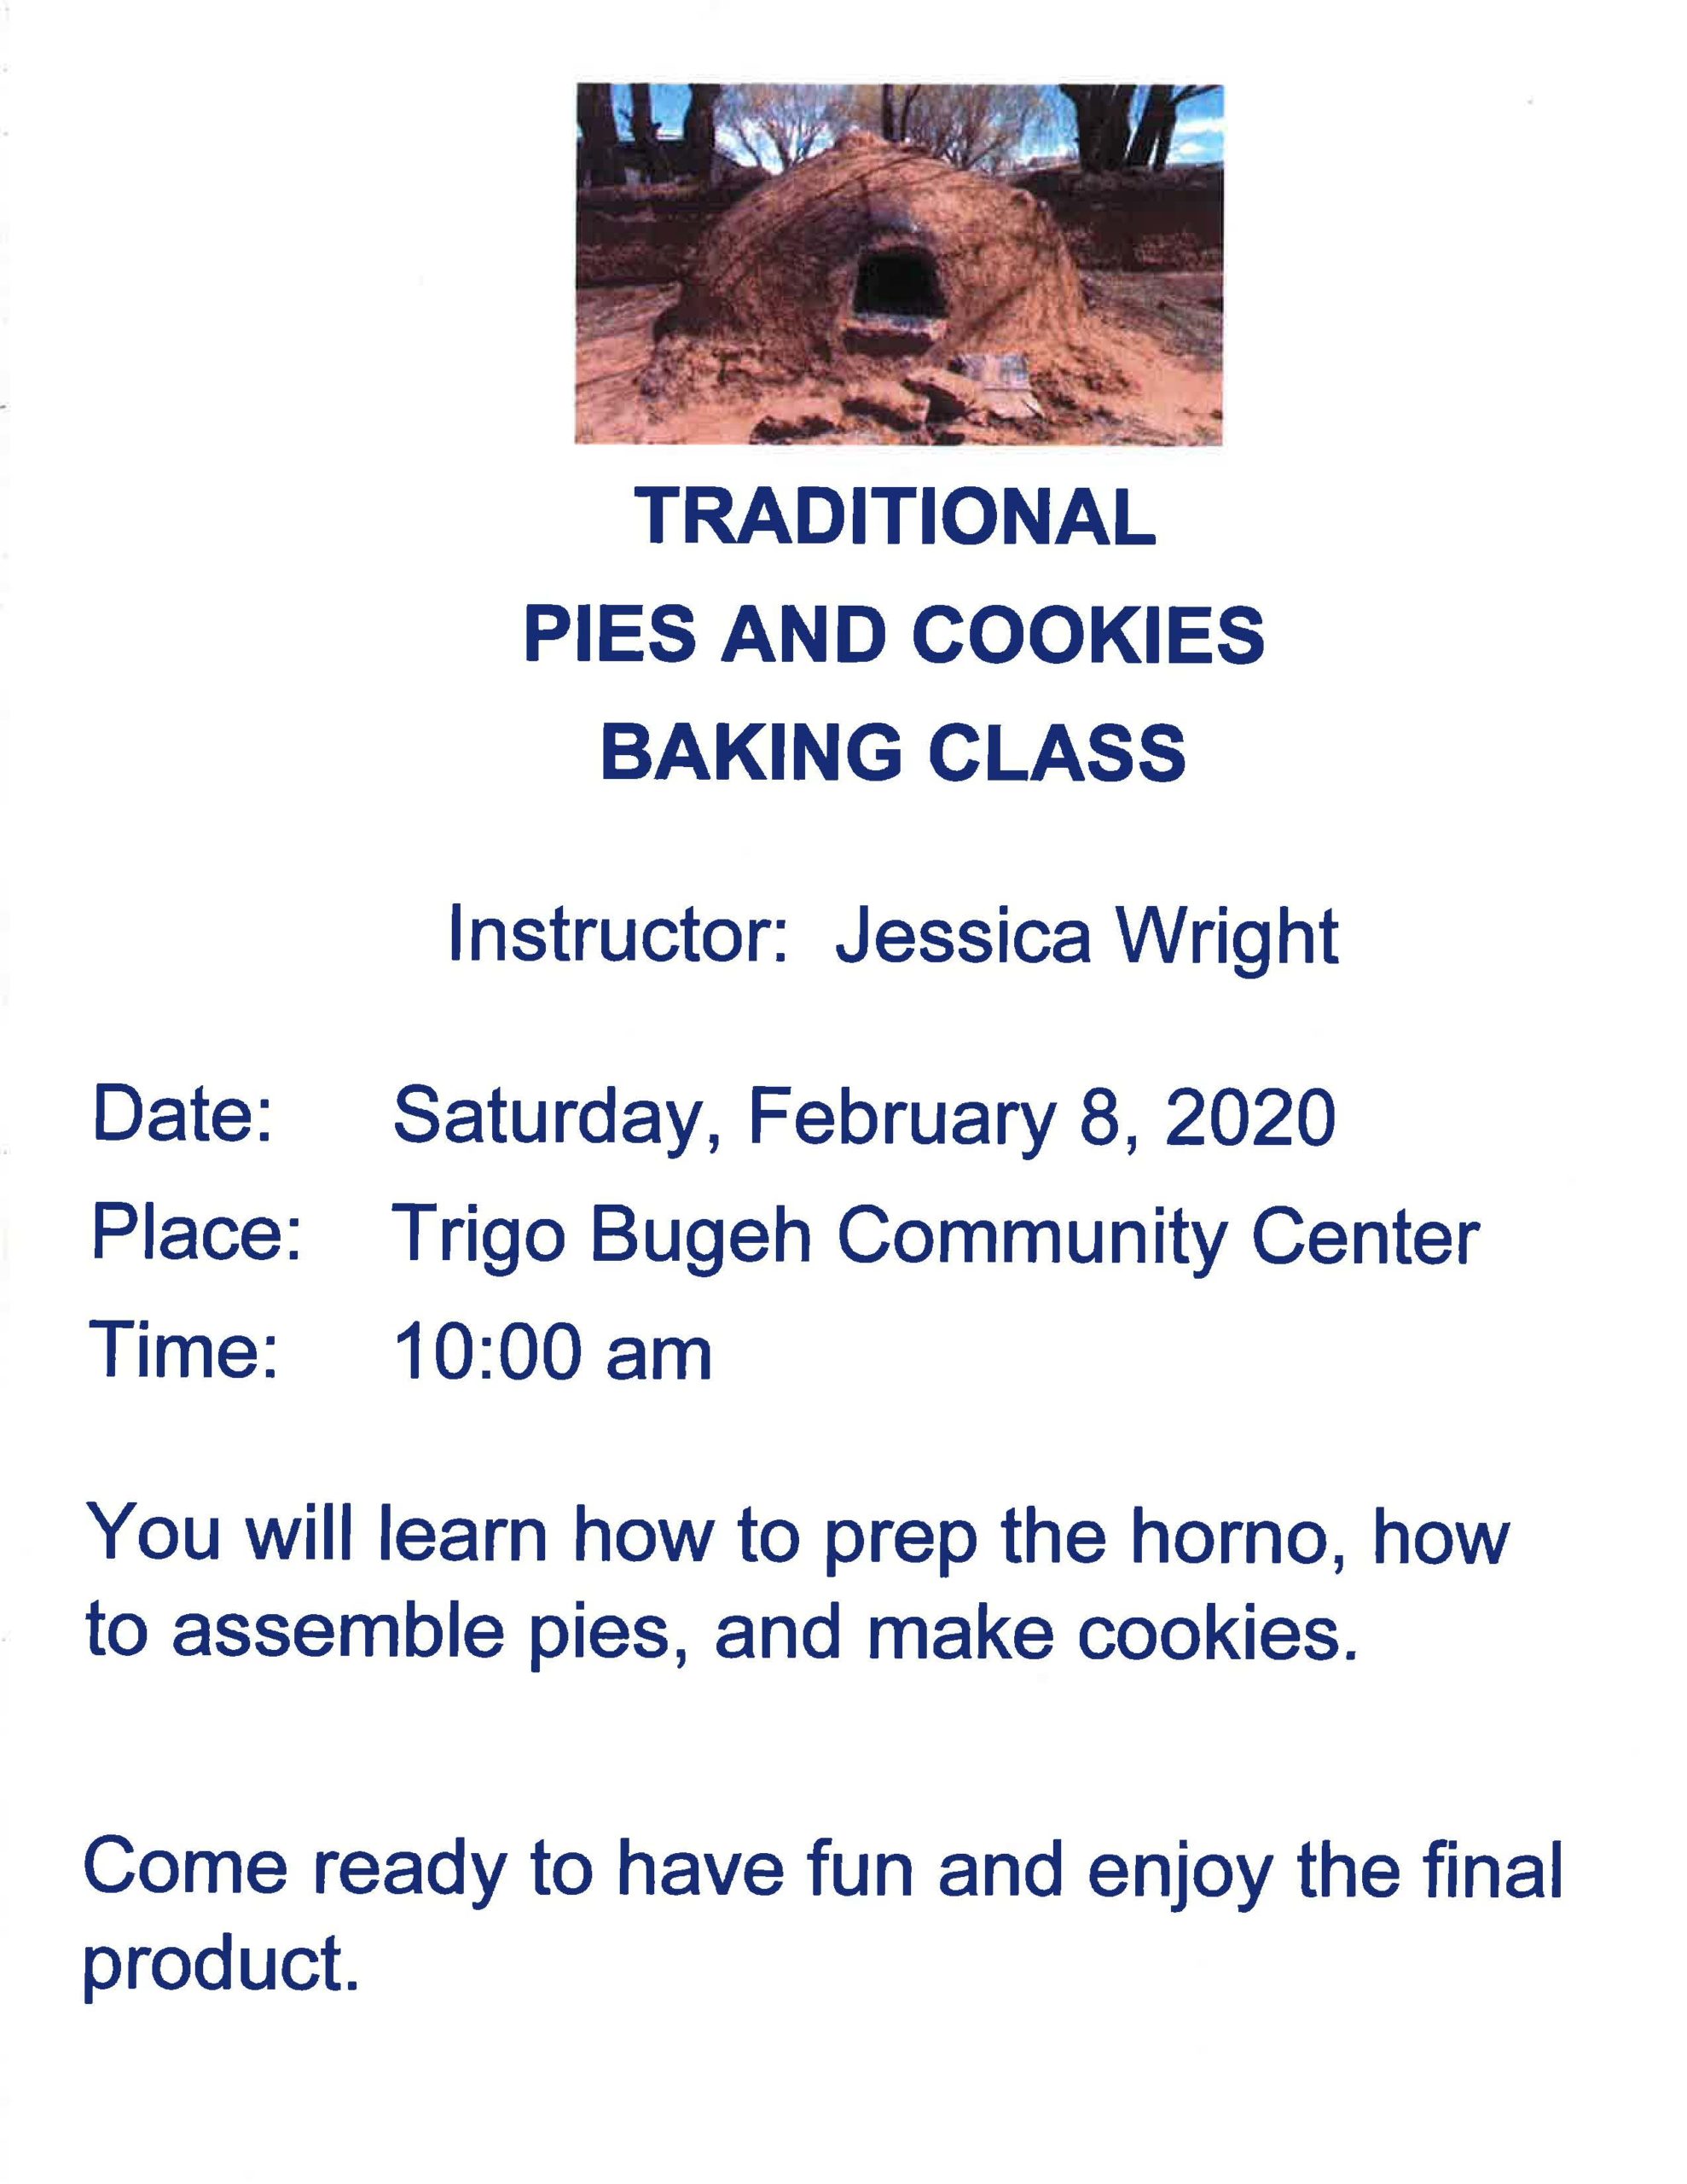 Traditional Pies and Cookies Baking Class image